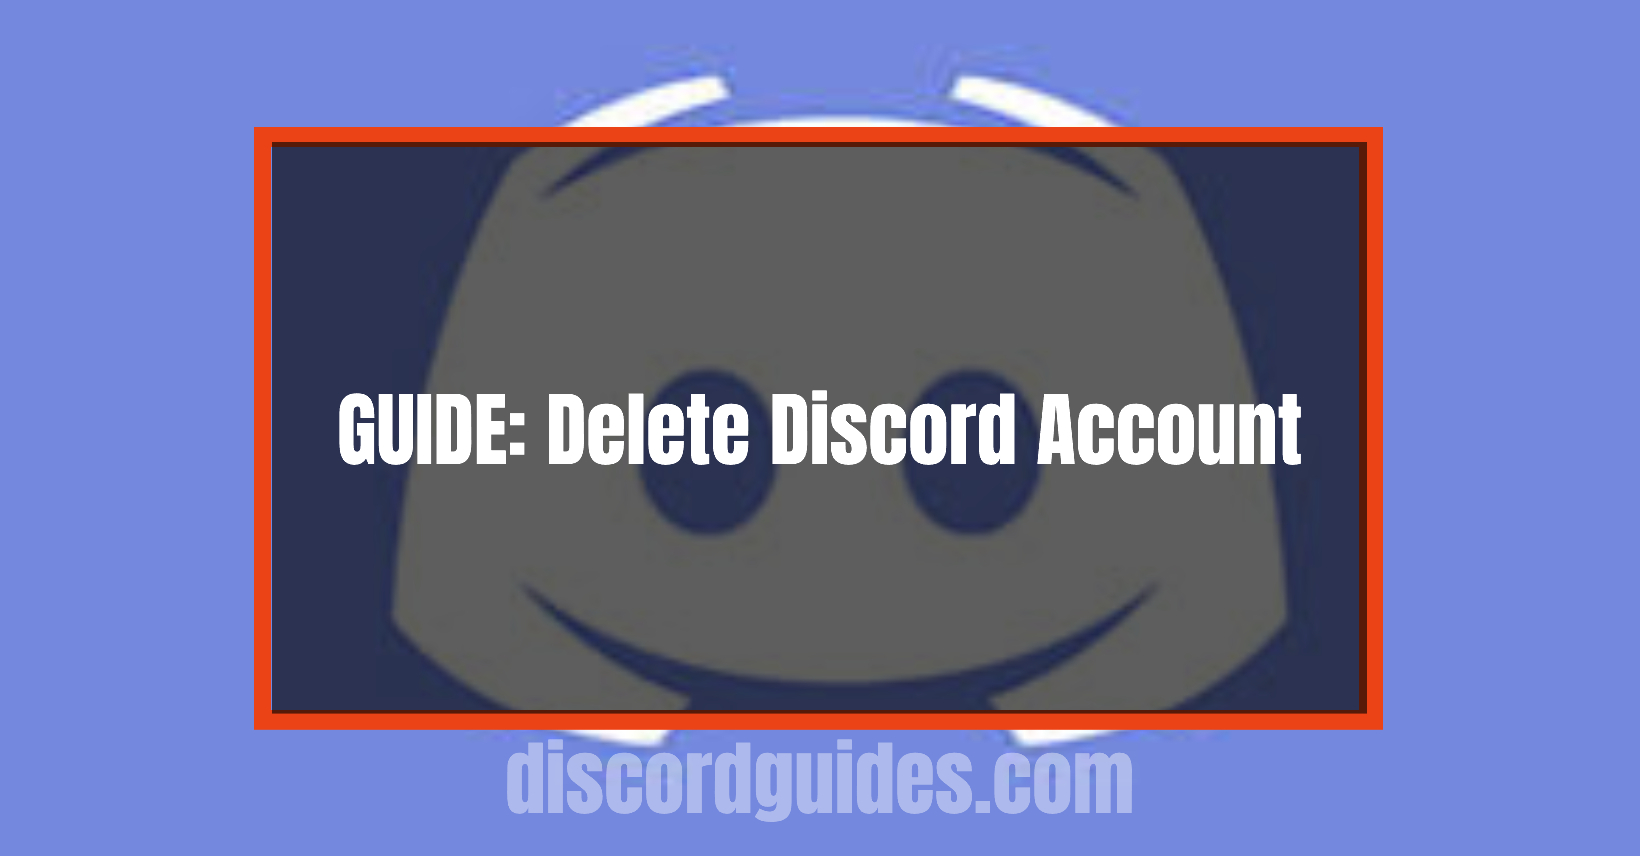 How to Delete Discord Account Permanently (Step-by-Step)